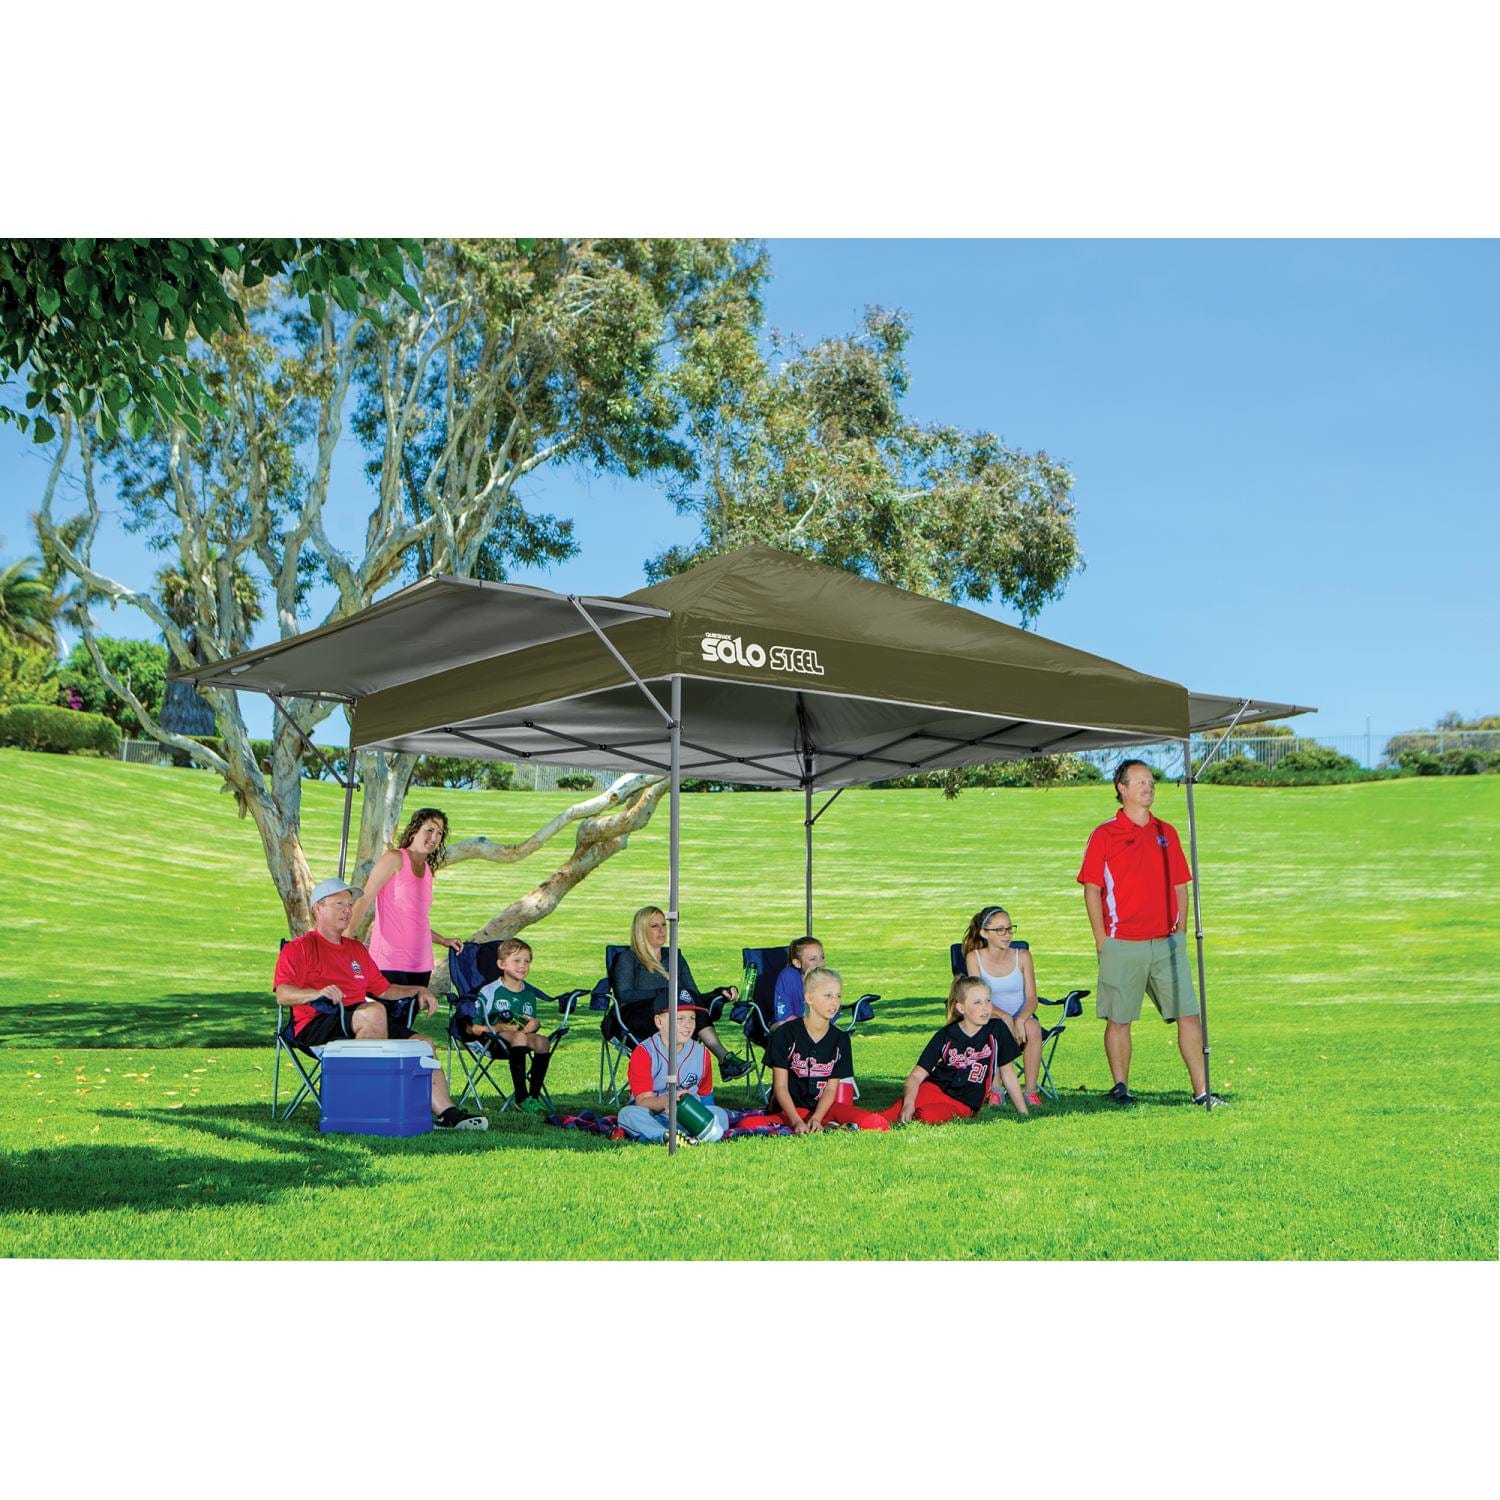 Quik Shade Pop Up Canopies Quik Shade | Solo Steel 170 10' x 17' Straight Leg Canopy - Olive 167550DS